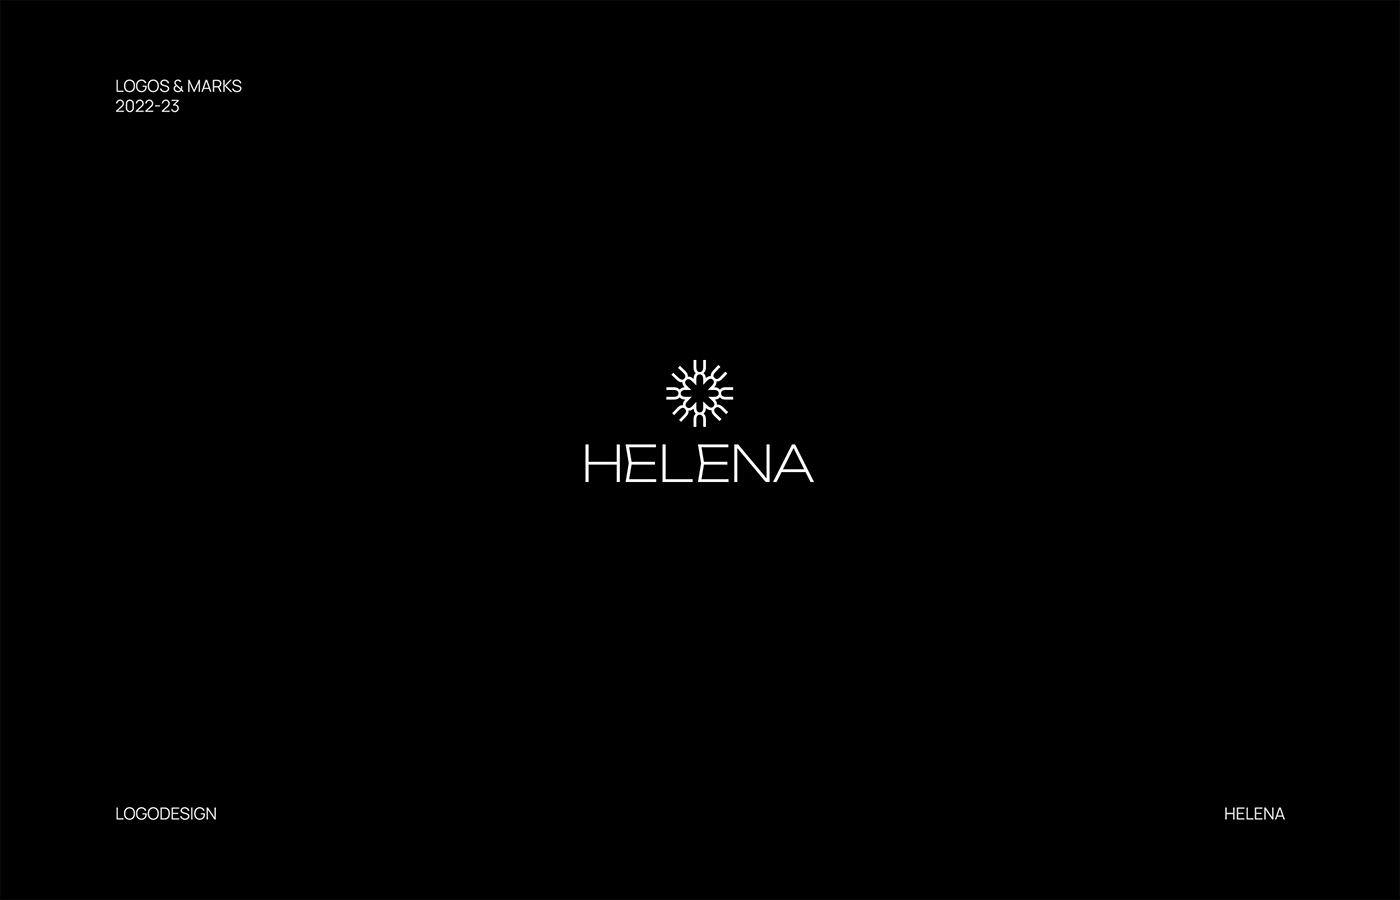 Helena - logo for cosmetic brand